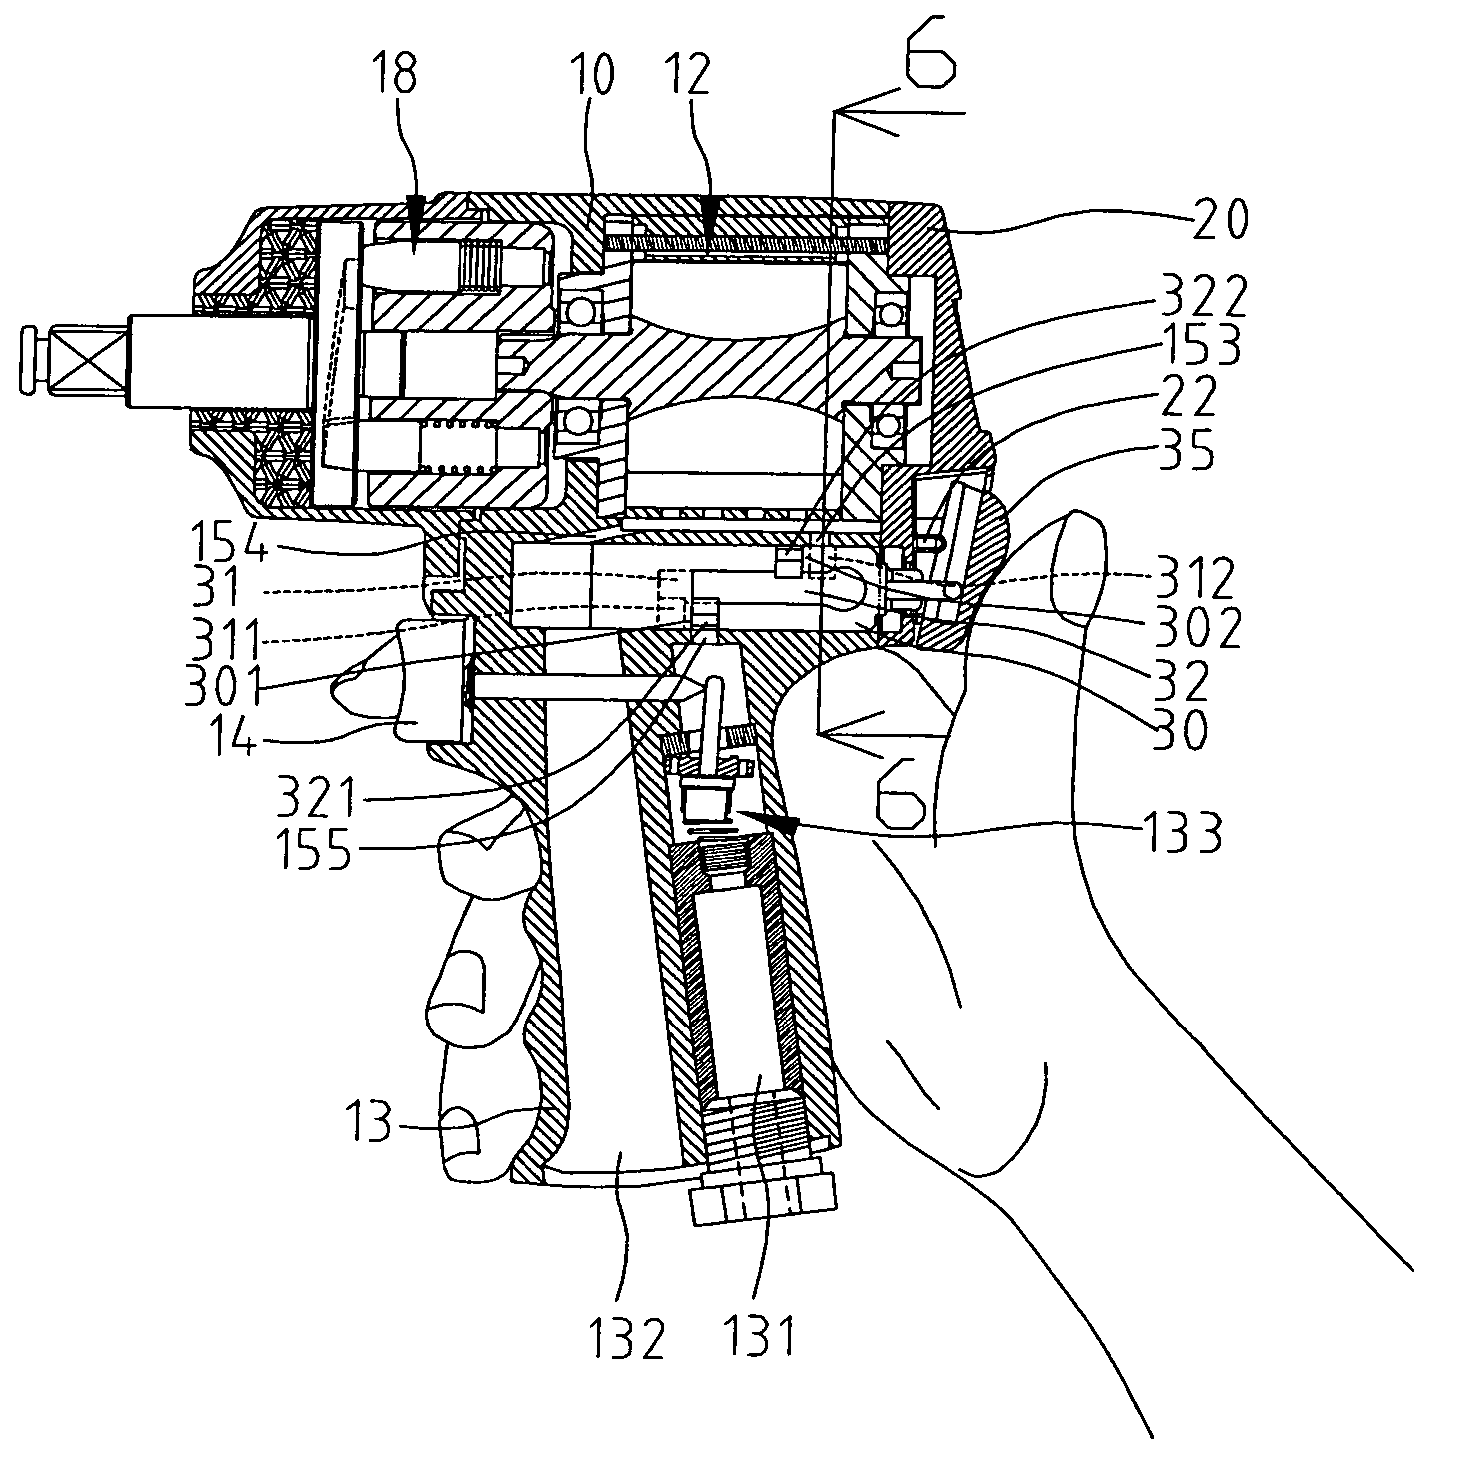 Pneumatic tool with direction switch operable with single hand